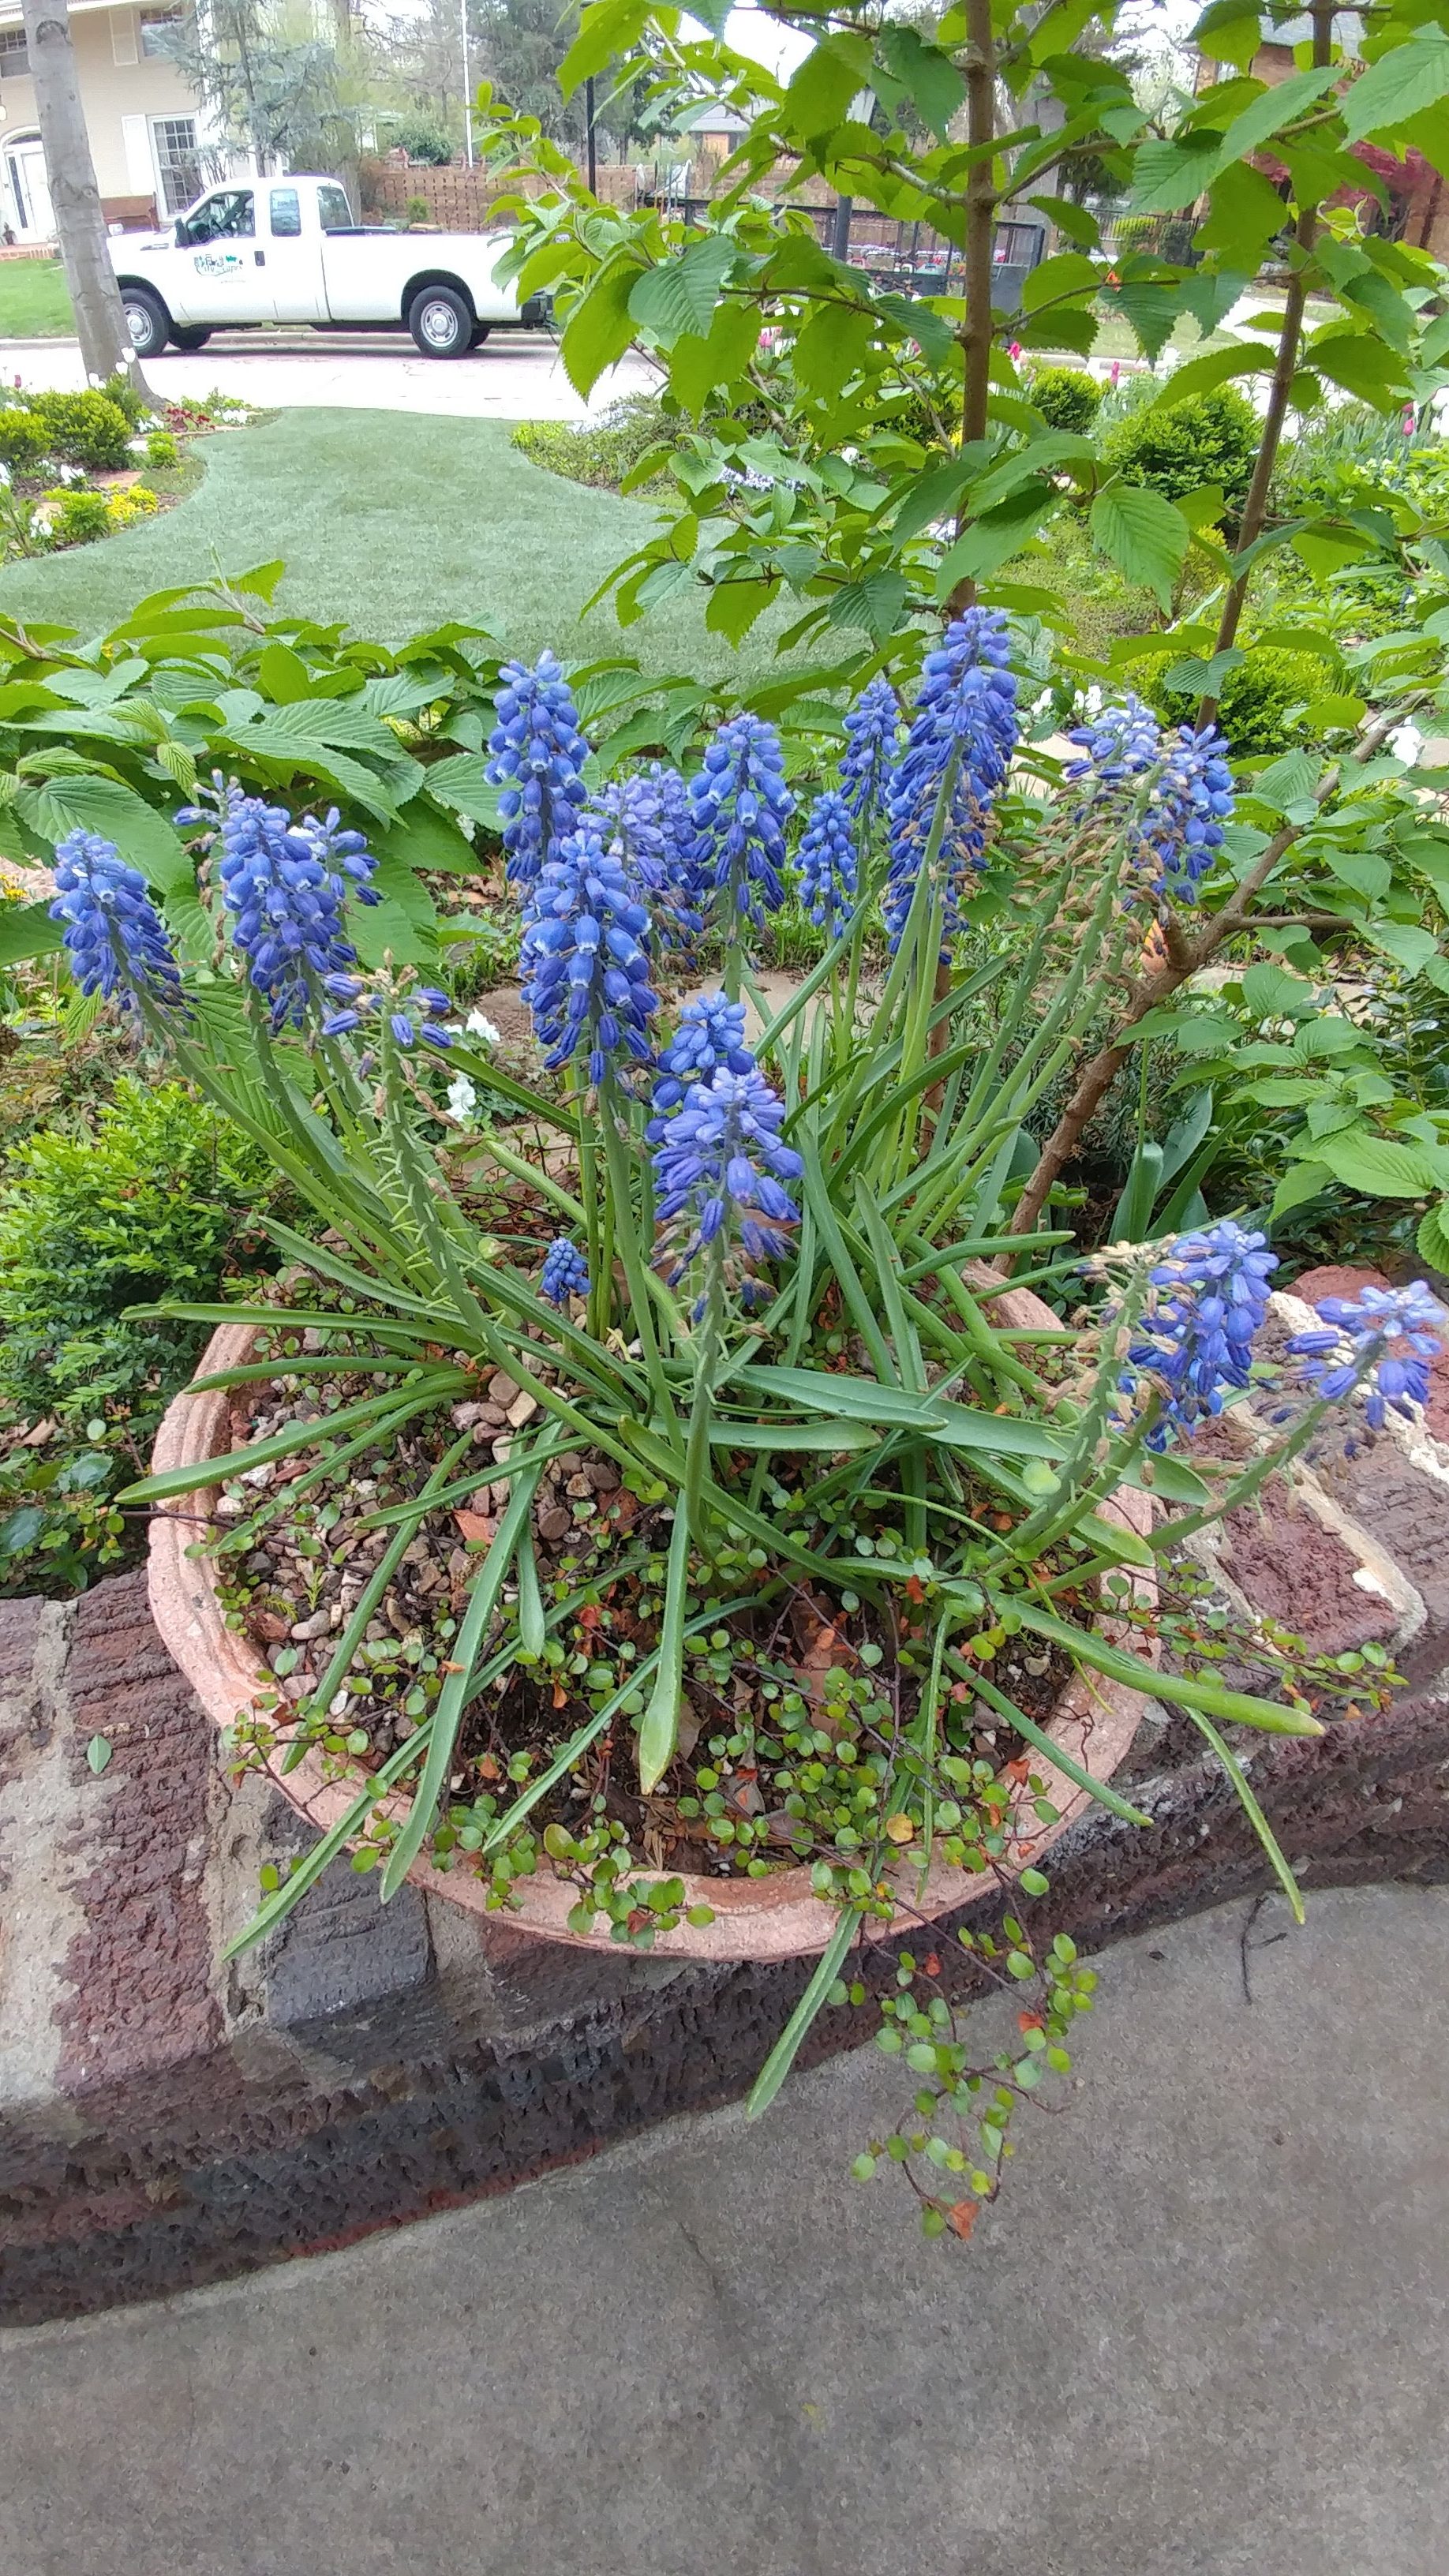 Muscari in a container in Linda Vater's garden